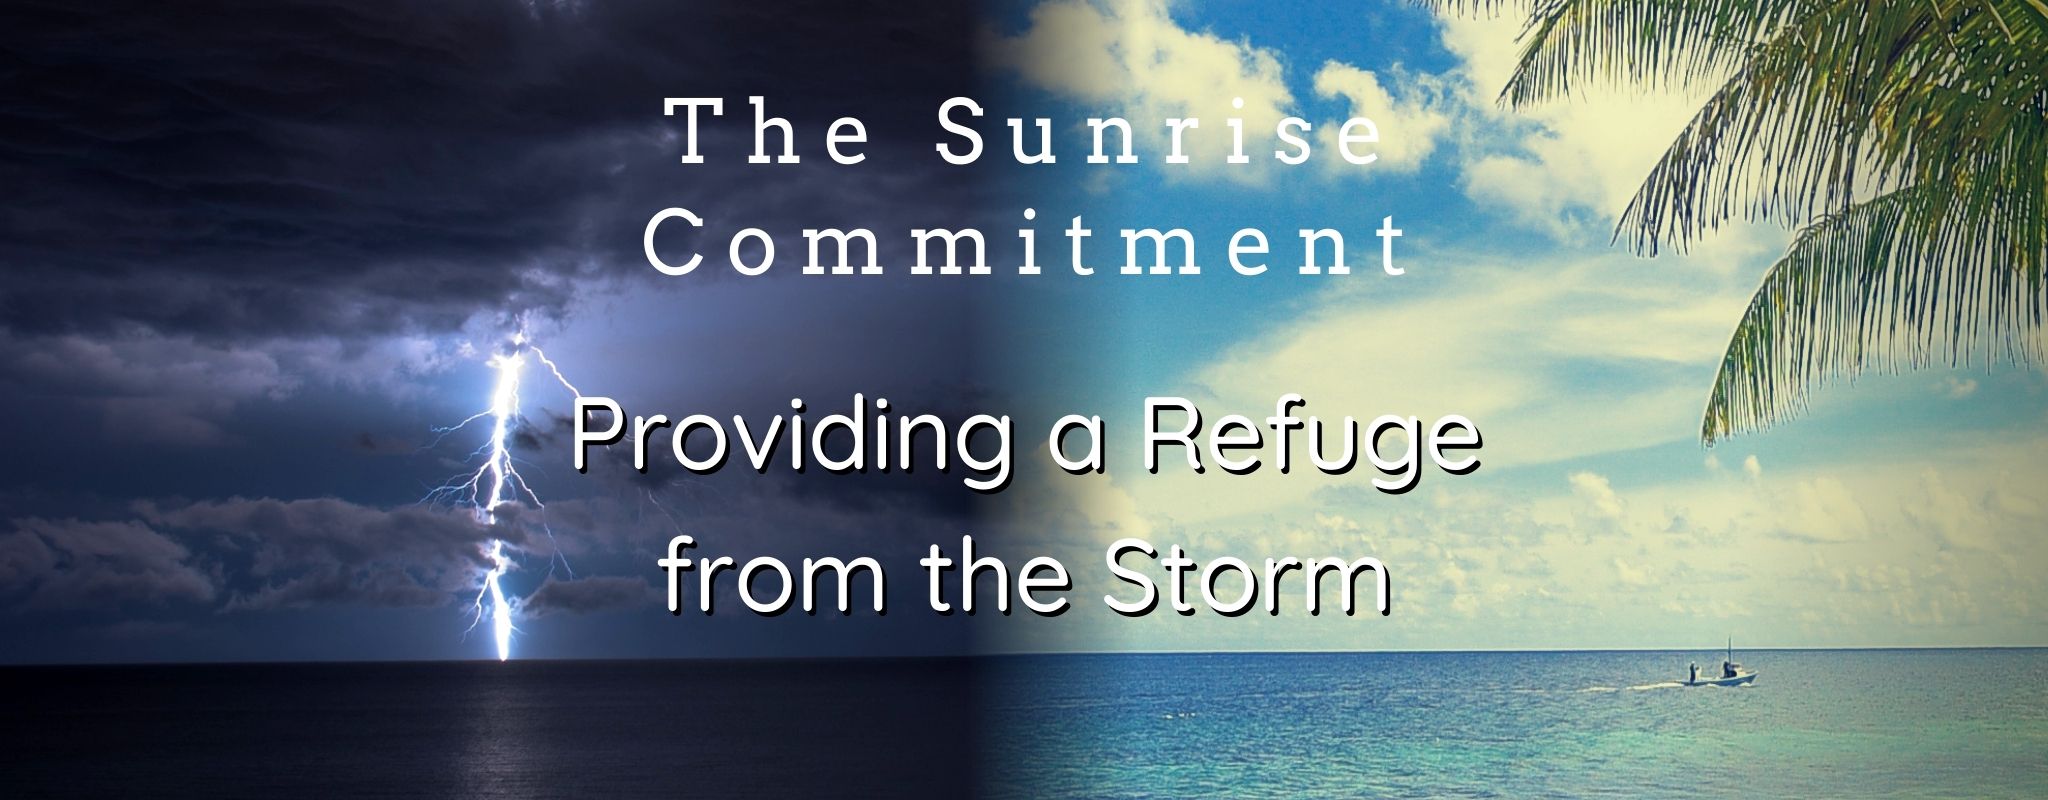 The Sunrise Commitment – Providing a Refuge from the Storm